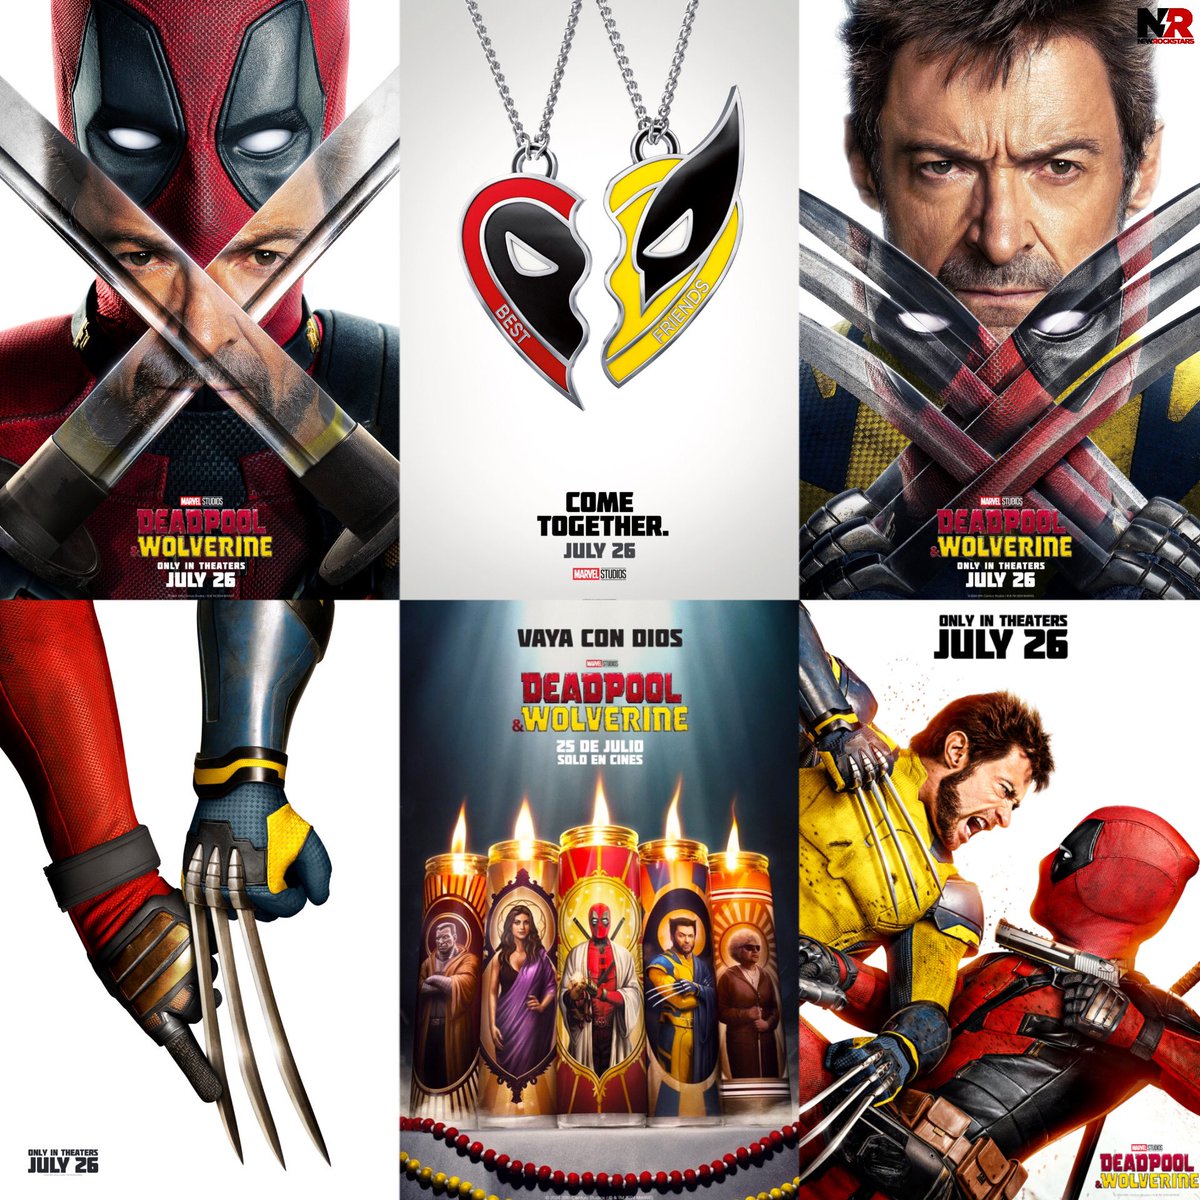 Deadpool & Wolverine posters don’t miss.